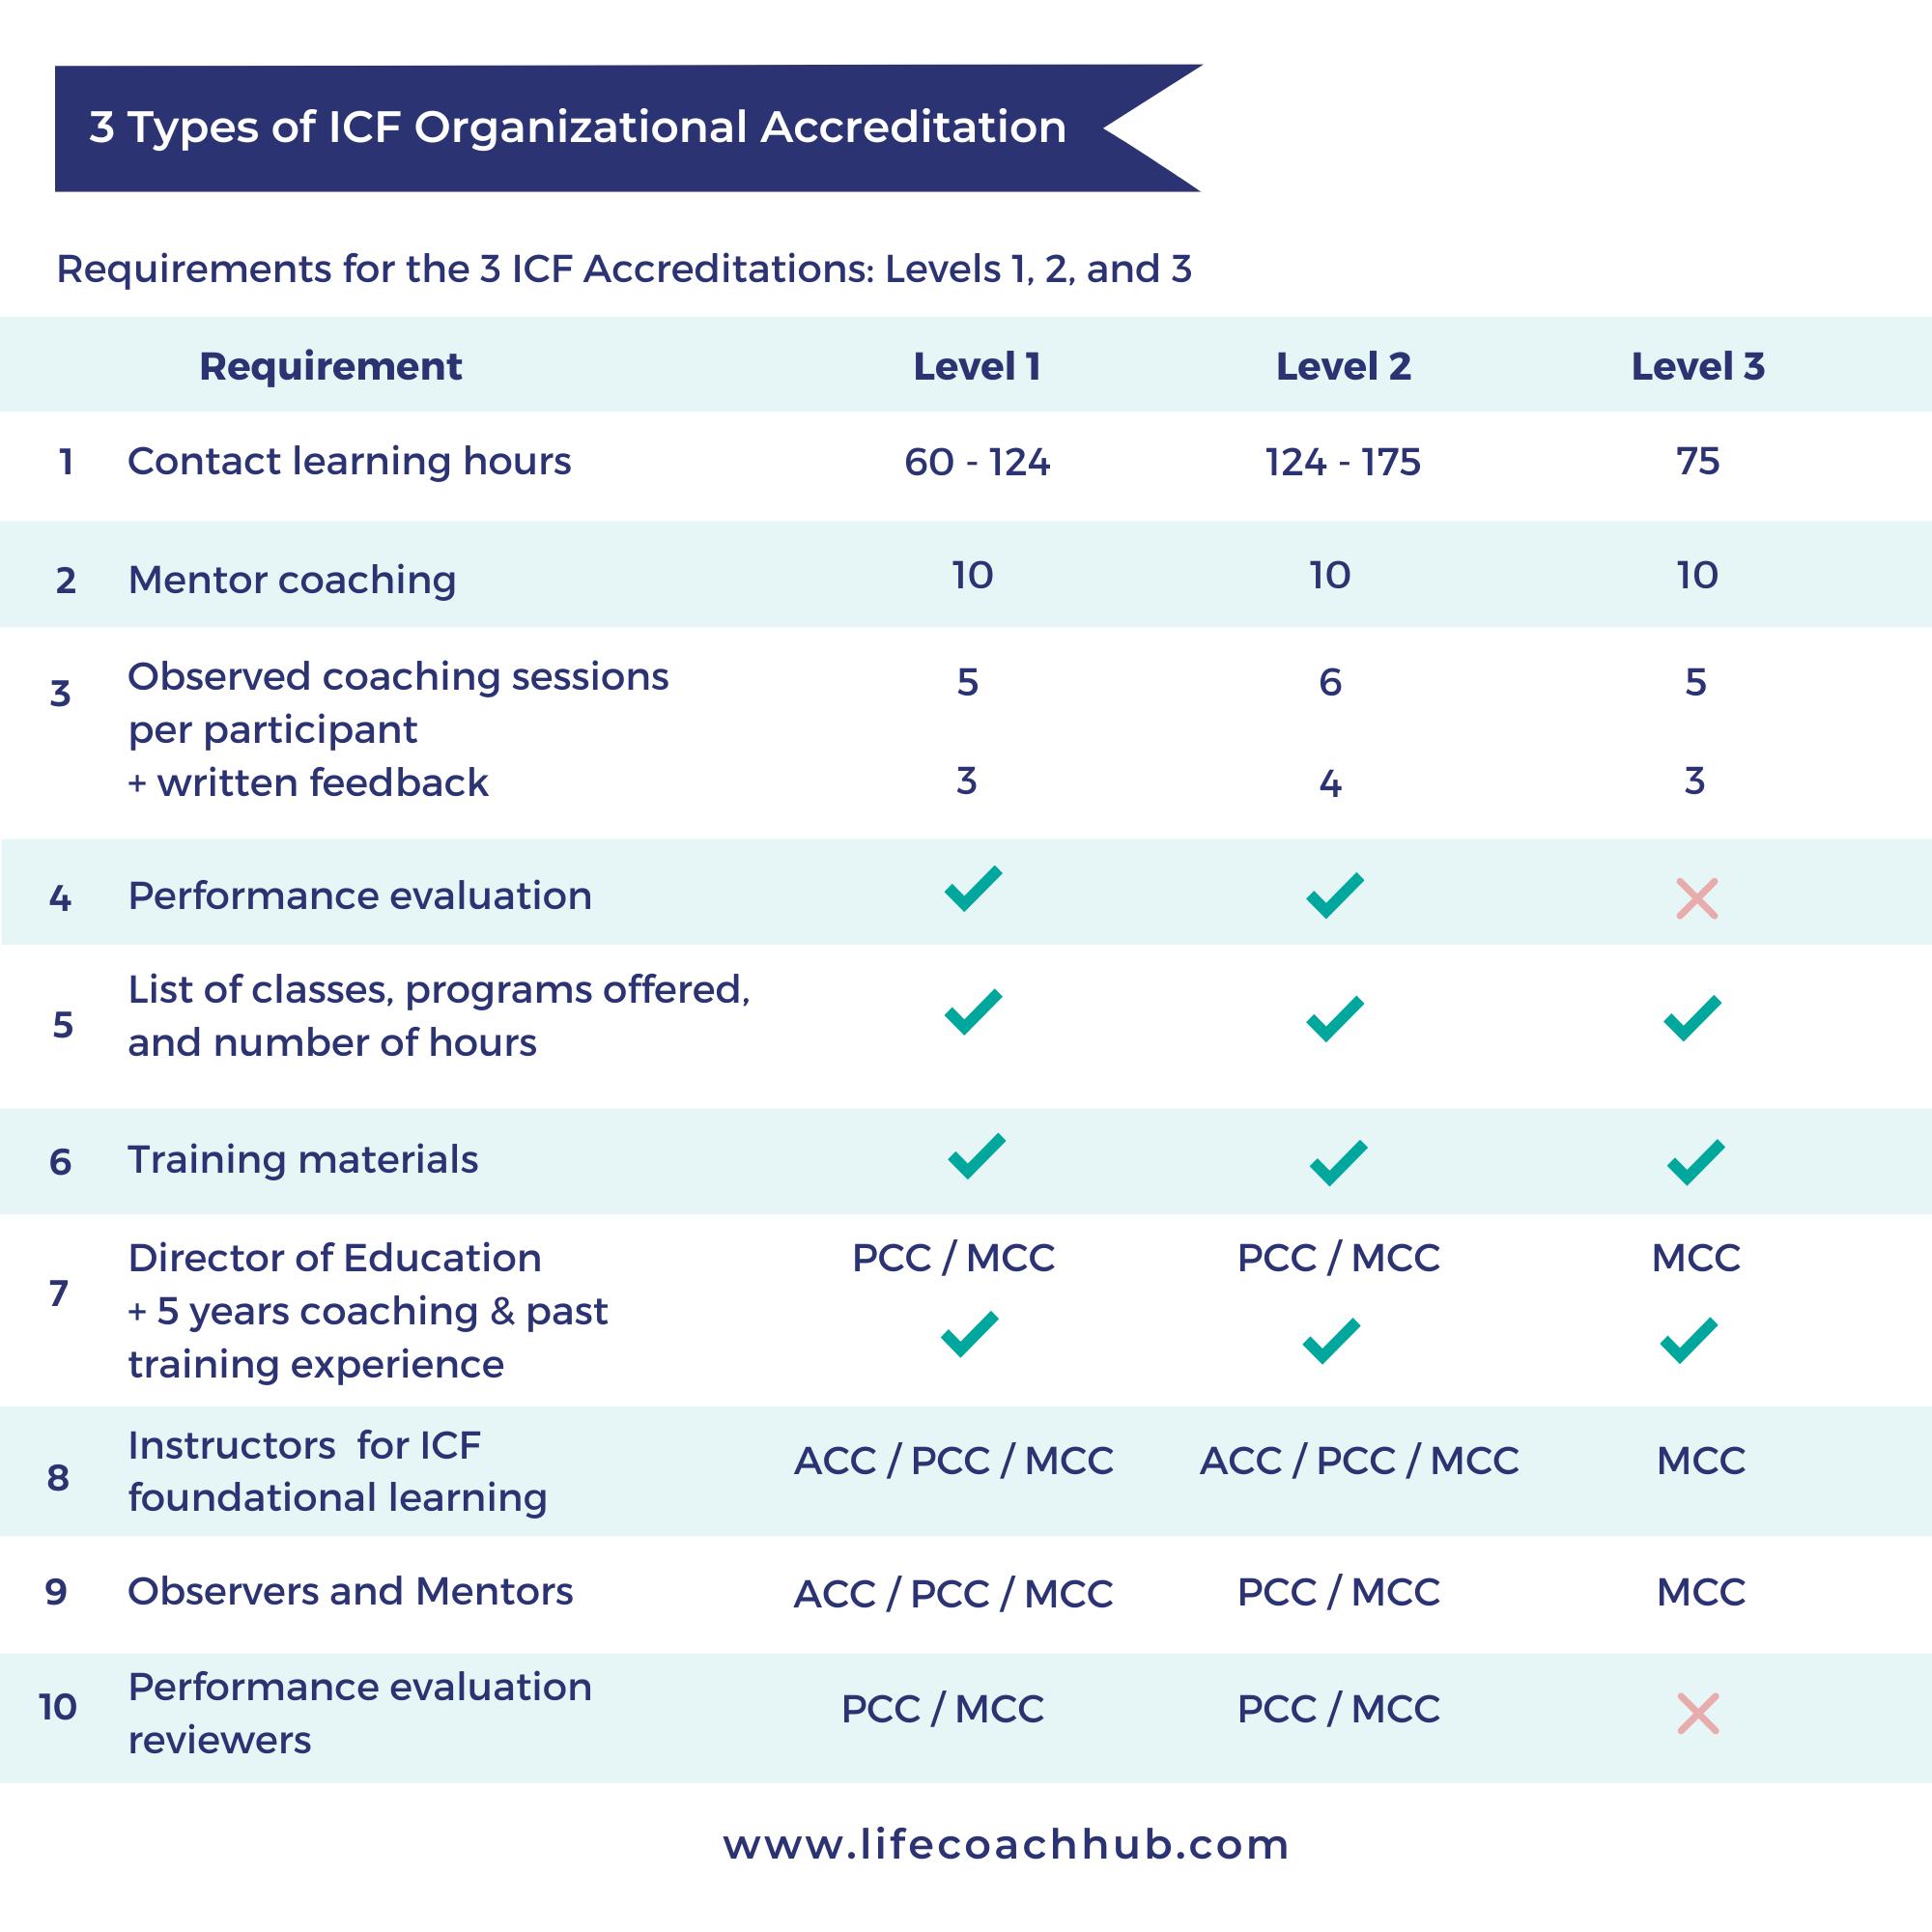 The 3 types of ICF organizational accreditation and their requirements